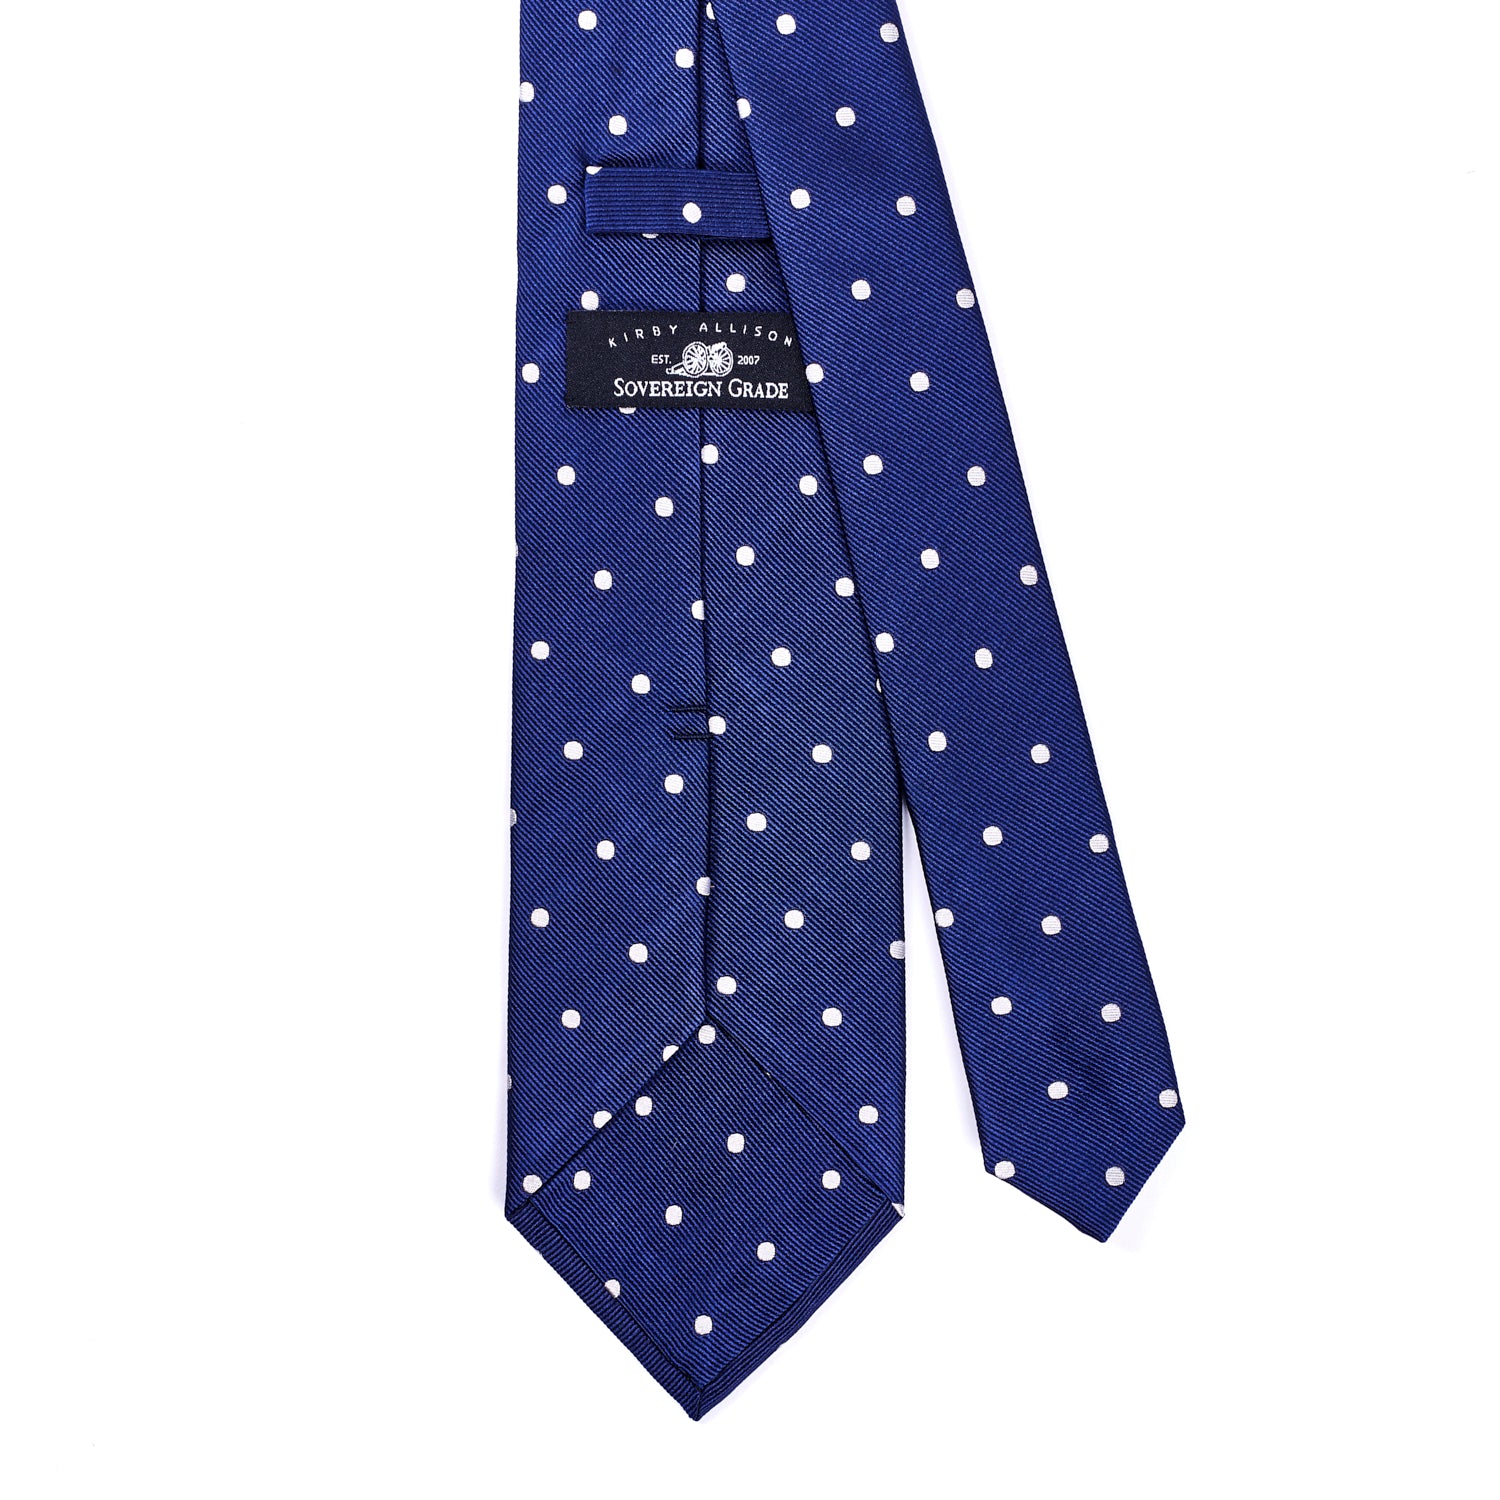 A KirbyAllison.com Sovereign Grade Woven Navy/White Wide Dot Tie, 150 cm on a white background, ideal for the United Kingdom.